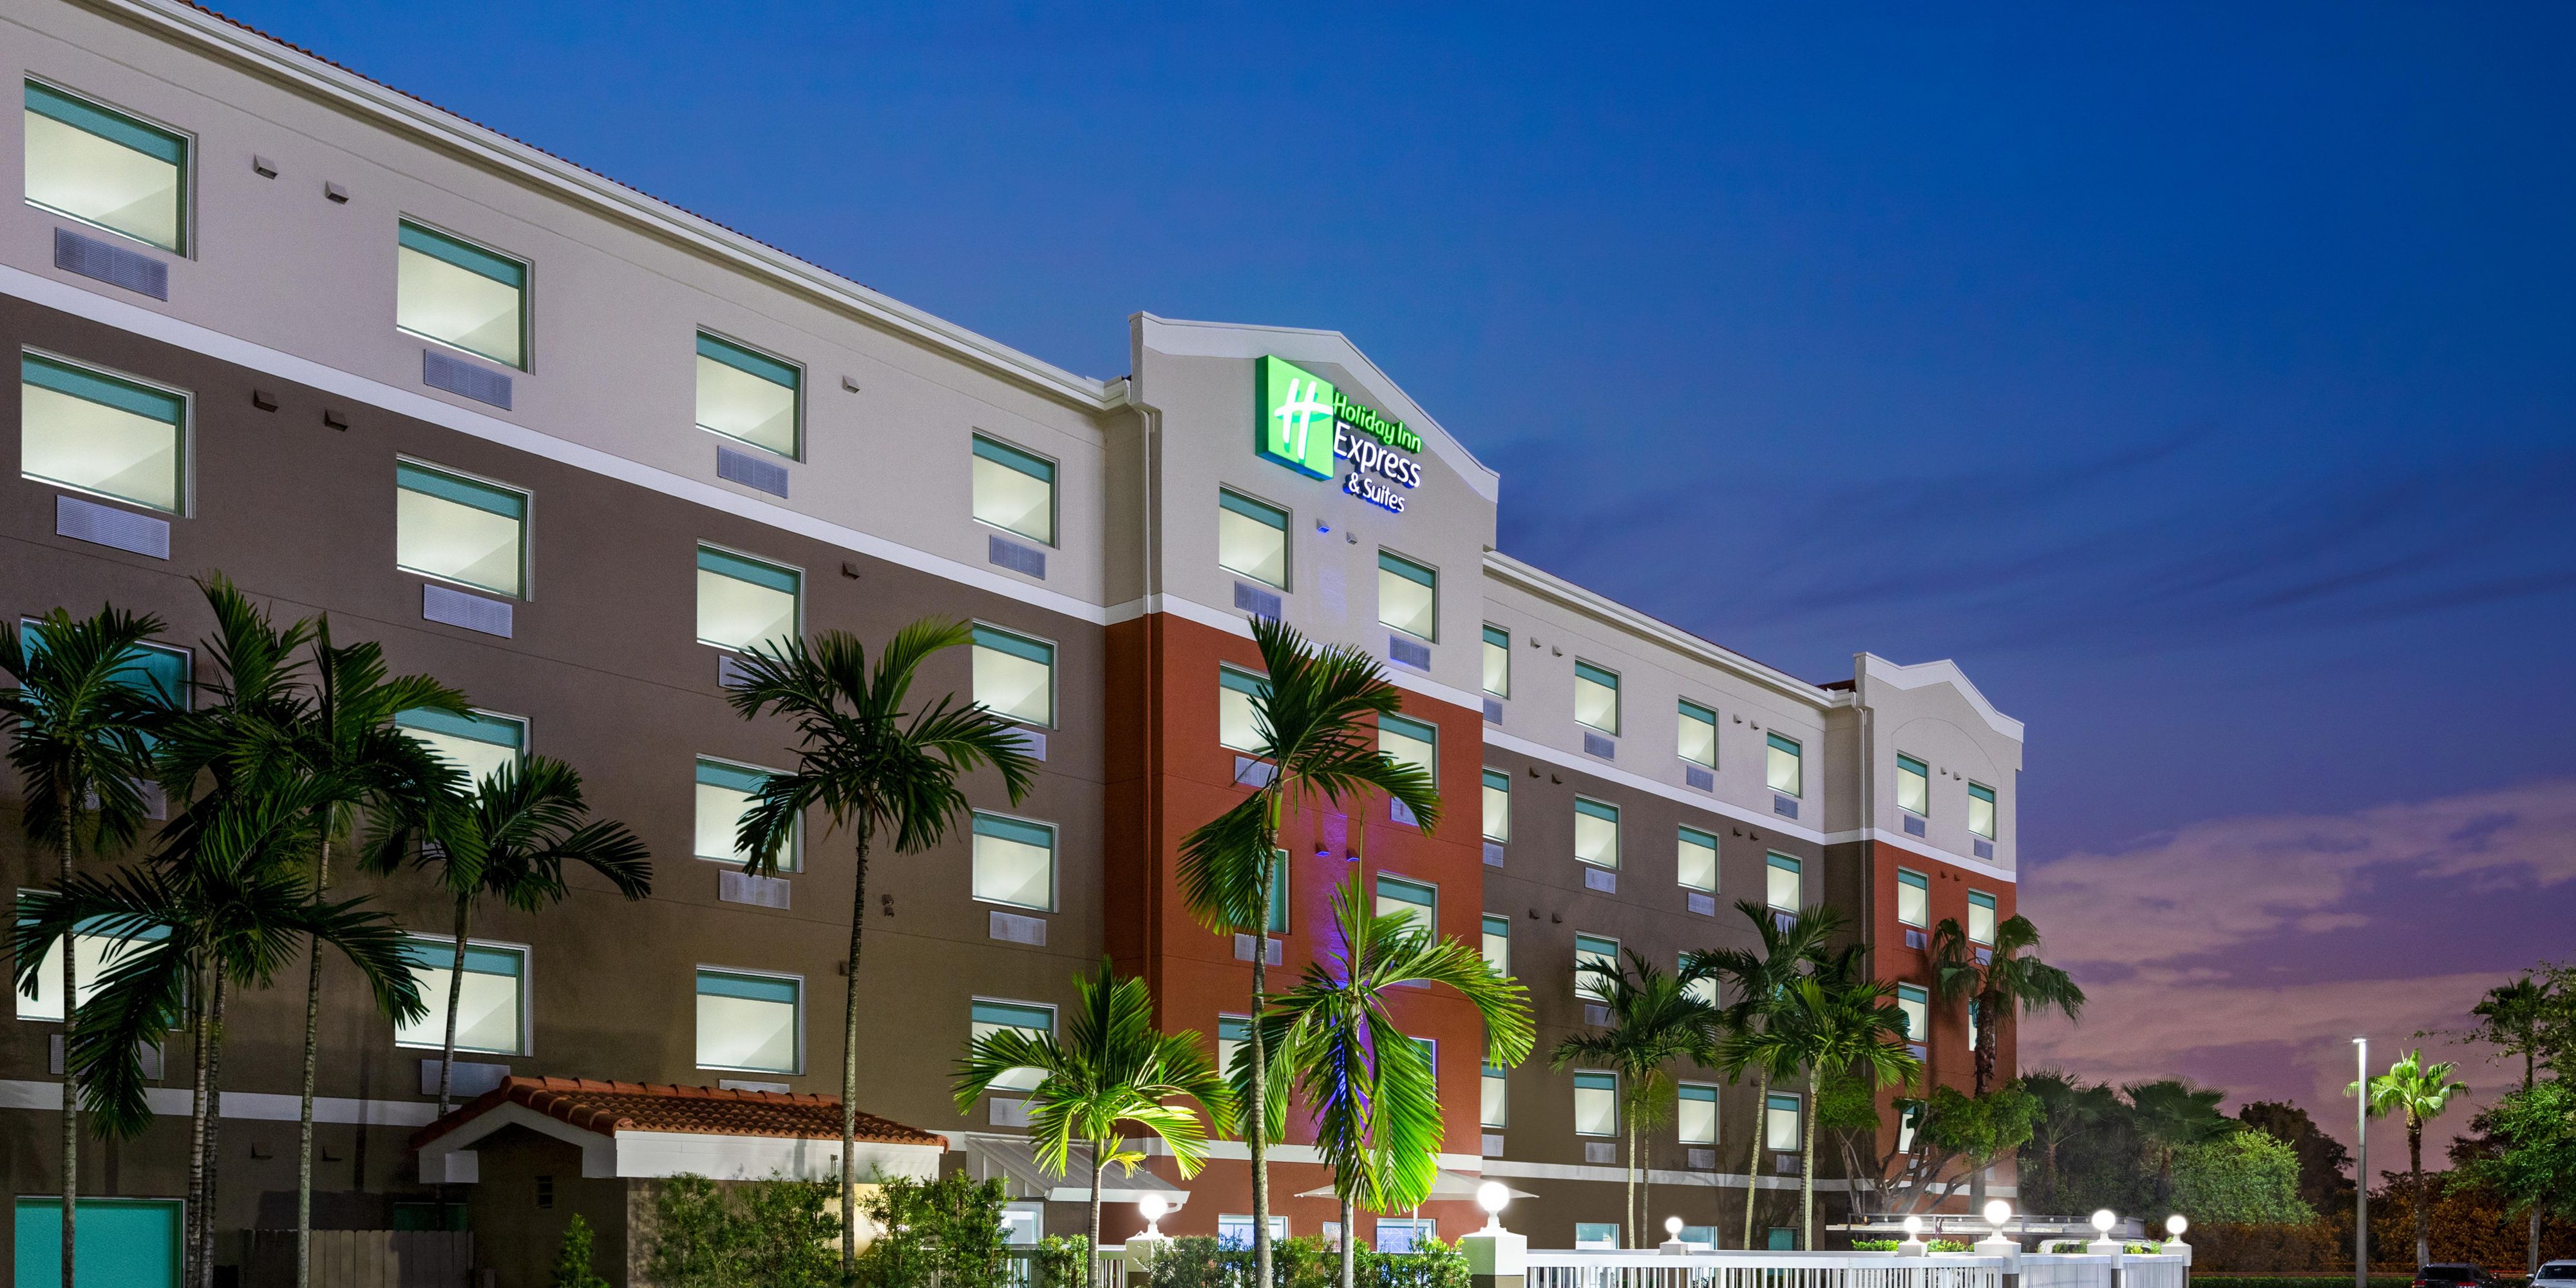 Hotels in Pembroke Pines Holiday Inn Express and Suites Pembroke Pines-Sheridan St picture